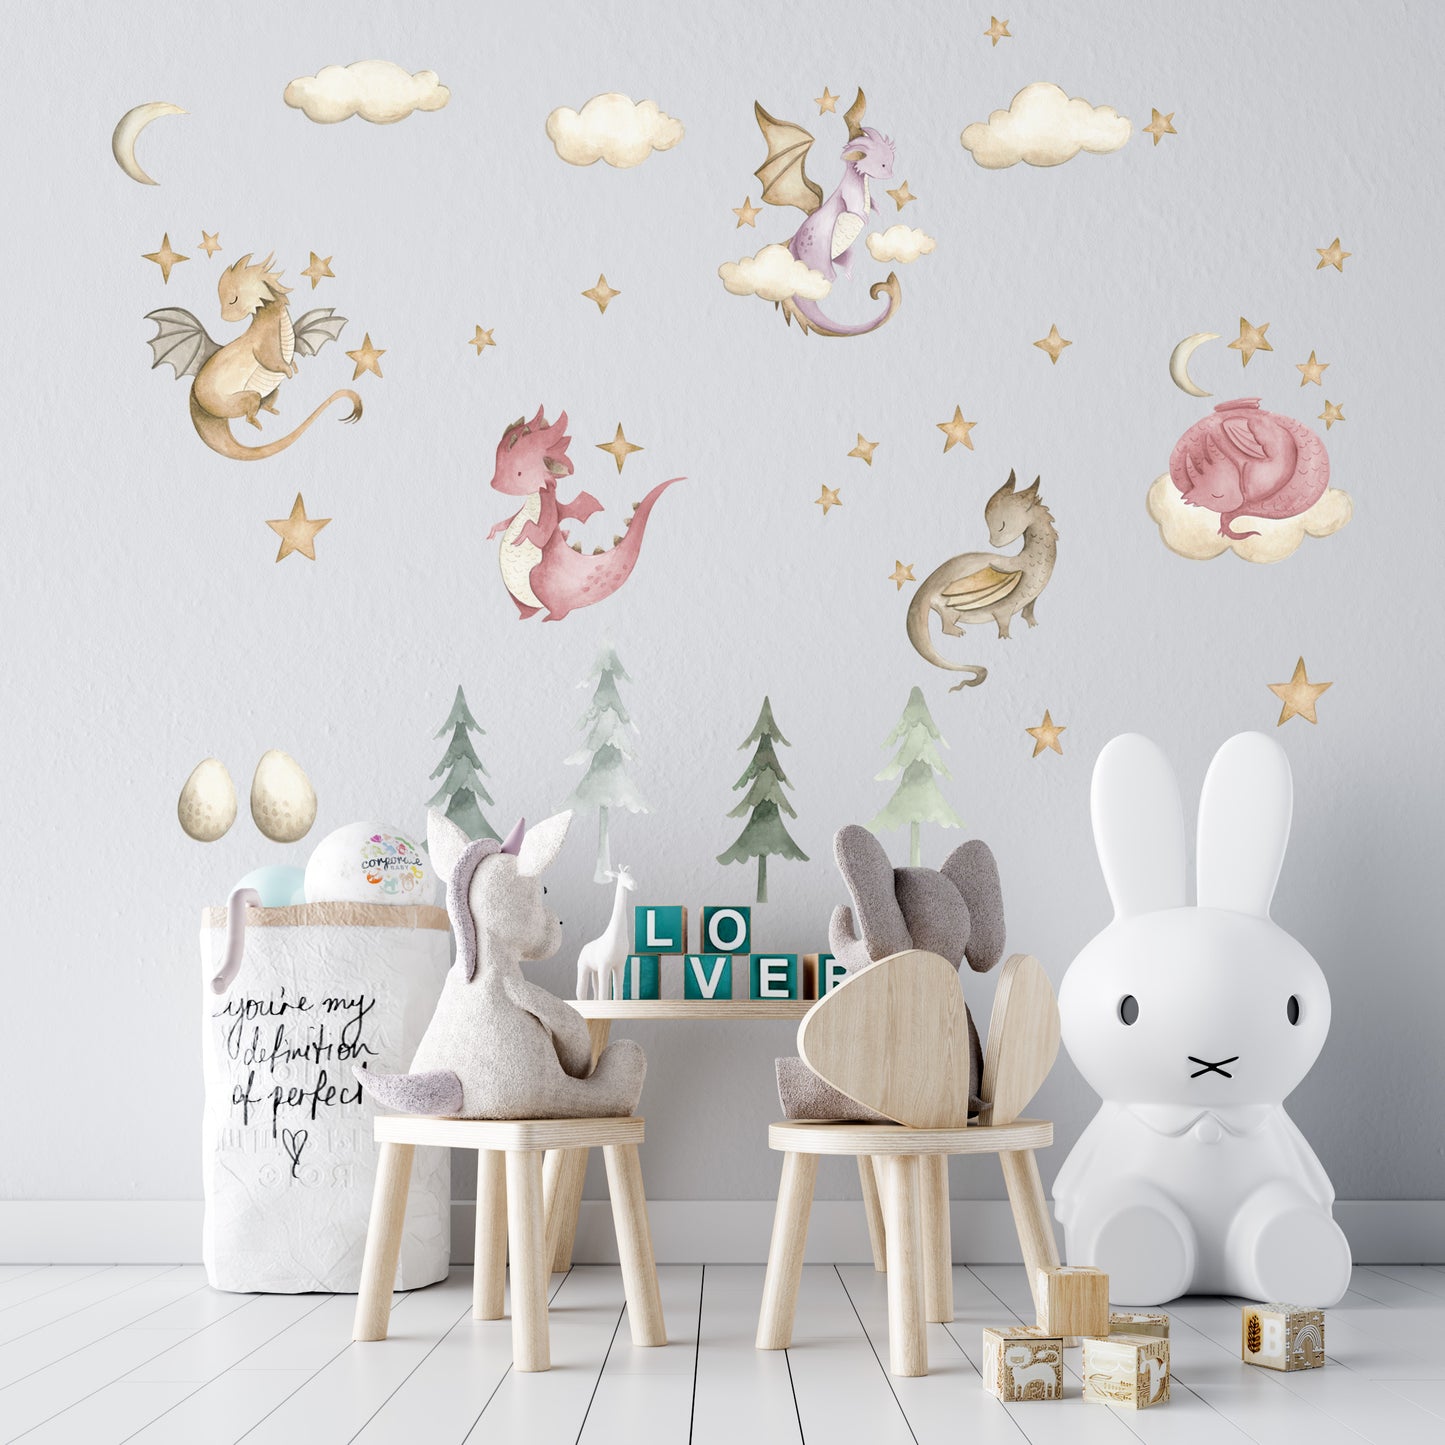 Baby Dragon Wall Decals - Green or Pink - Wall Decals - Fable and Fawn 